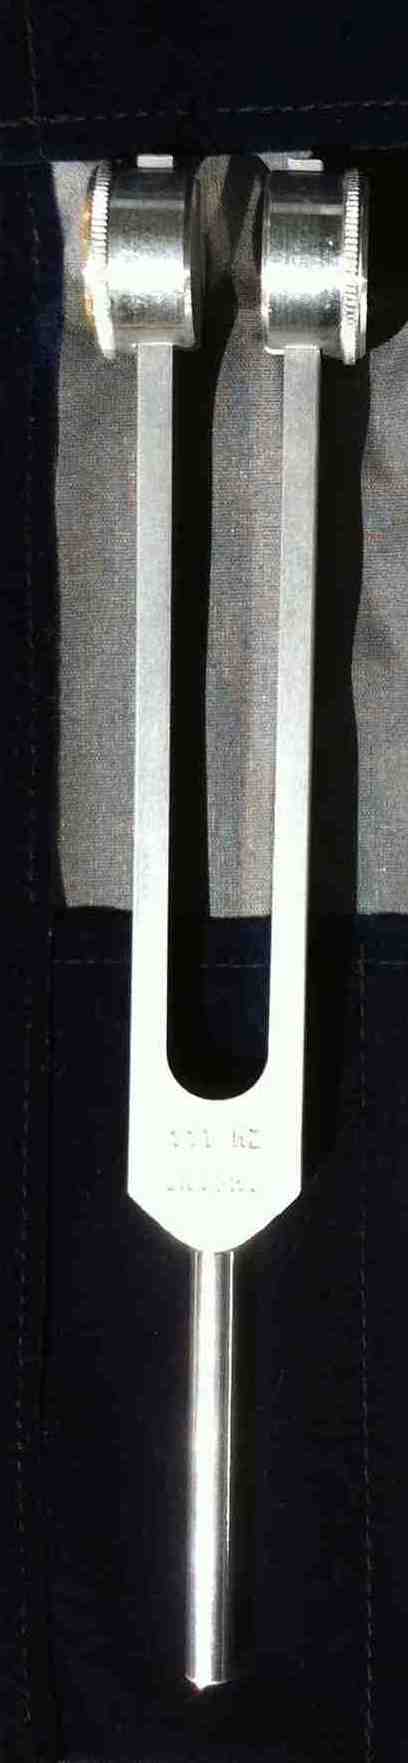 tuning fork solfeggio frequency